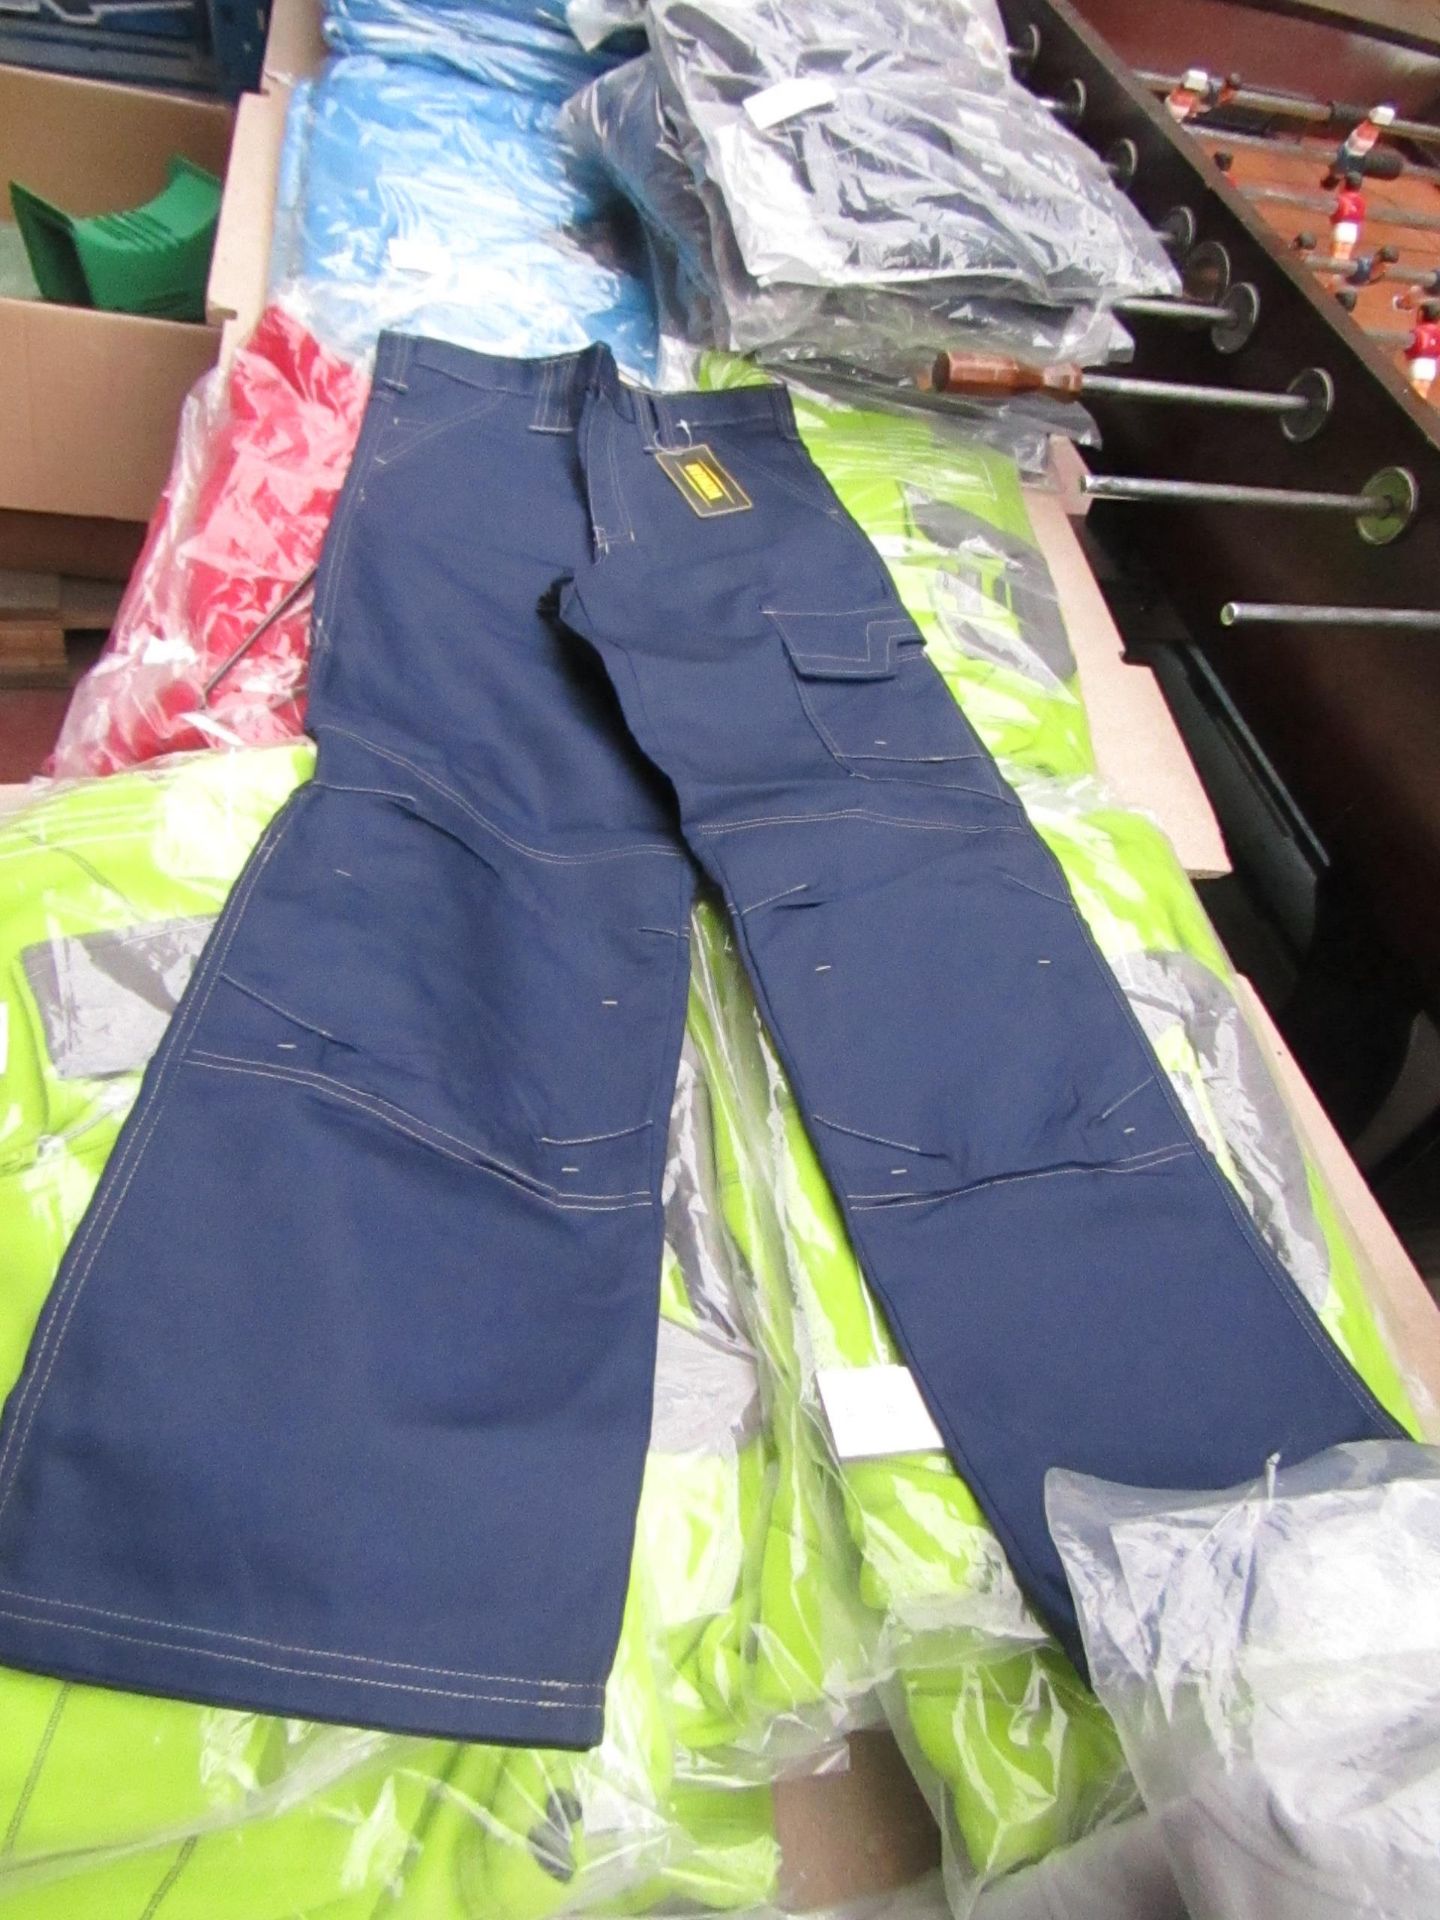 Vizwear action line trousers, size 28R, new and packaged.